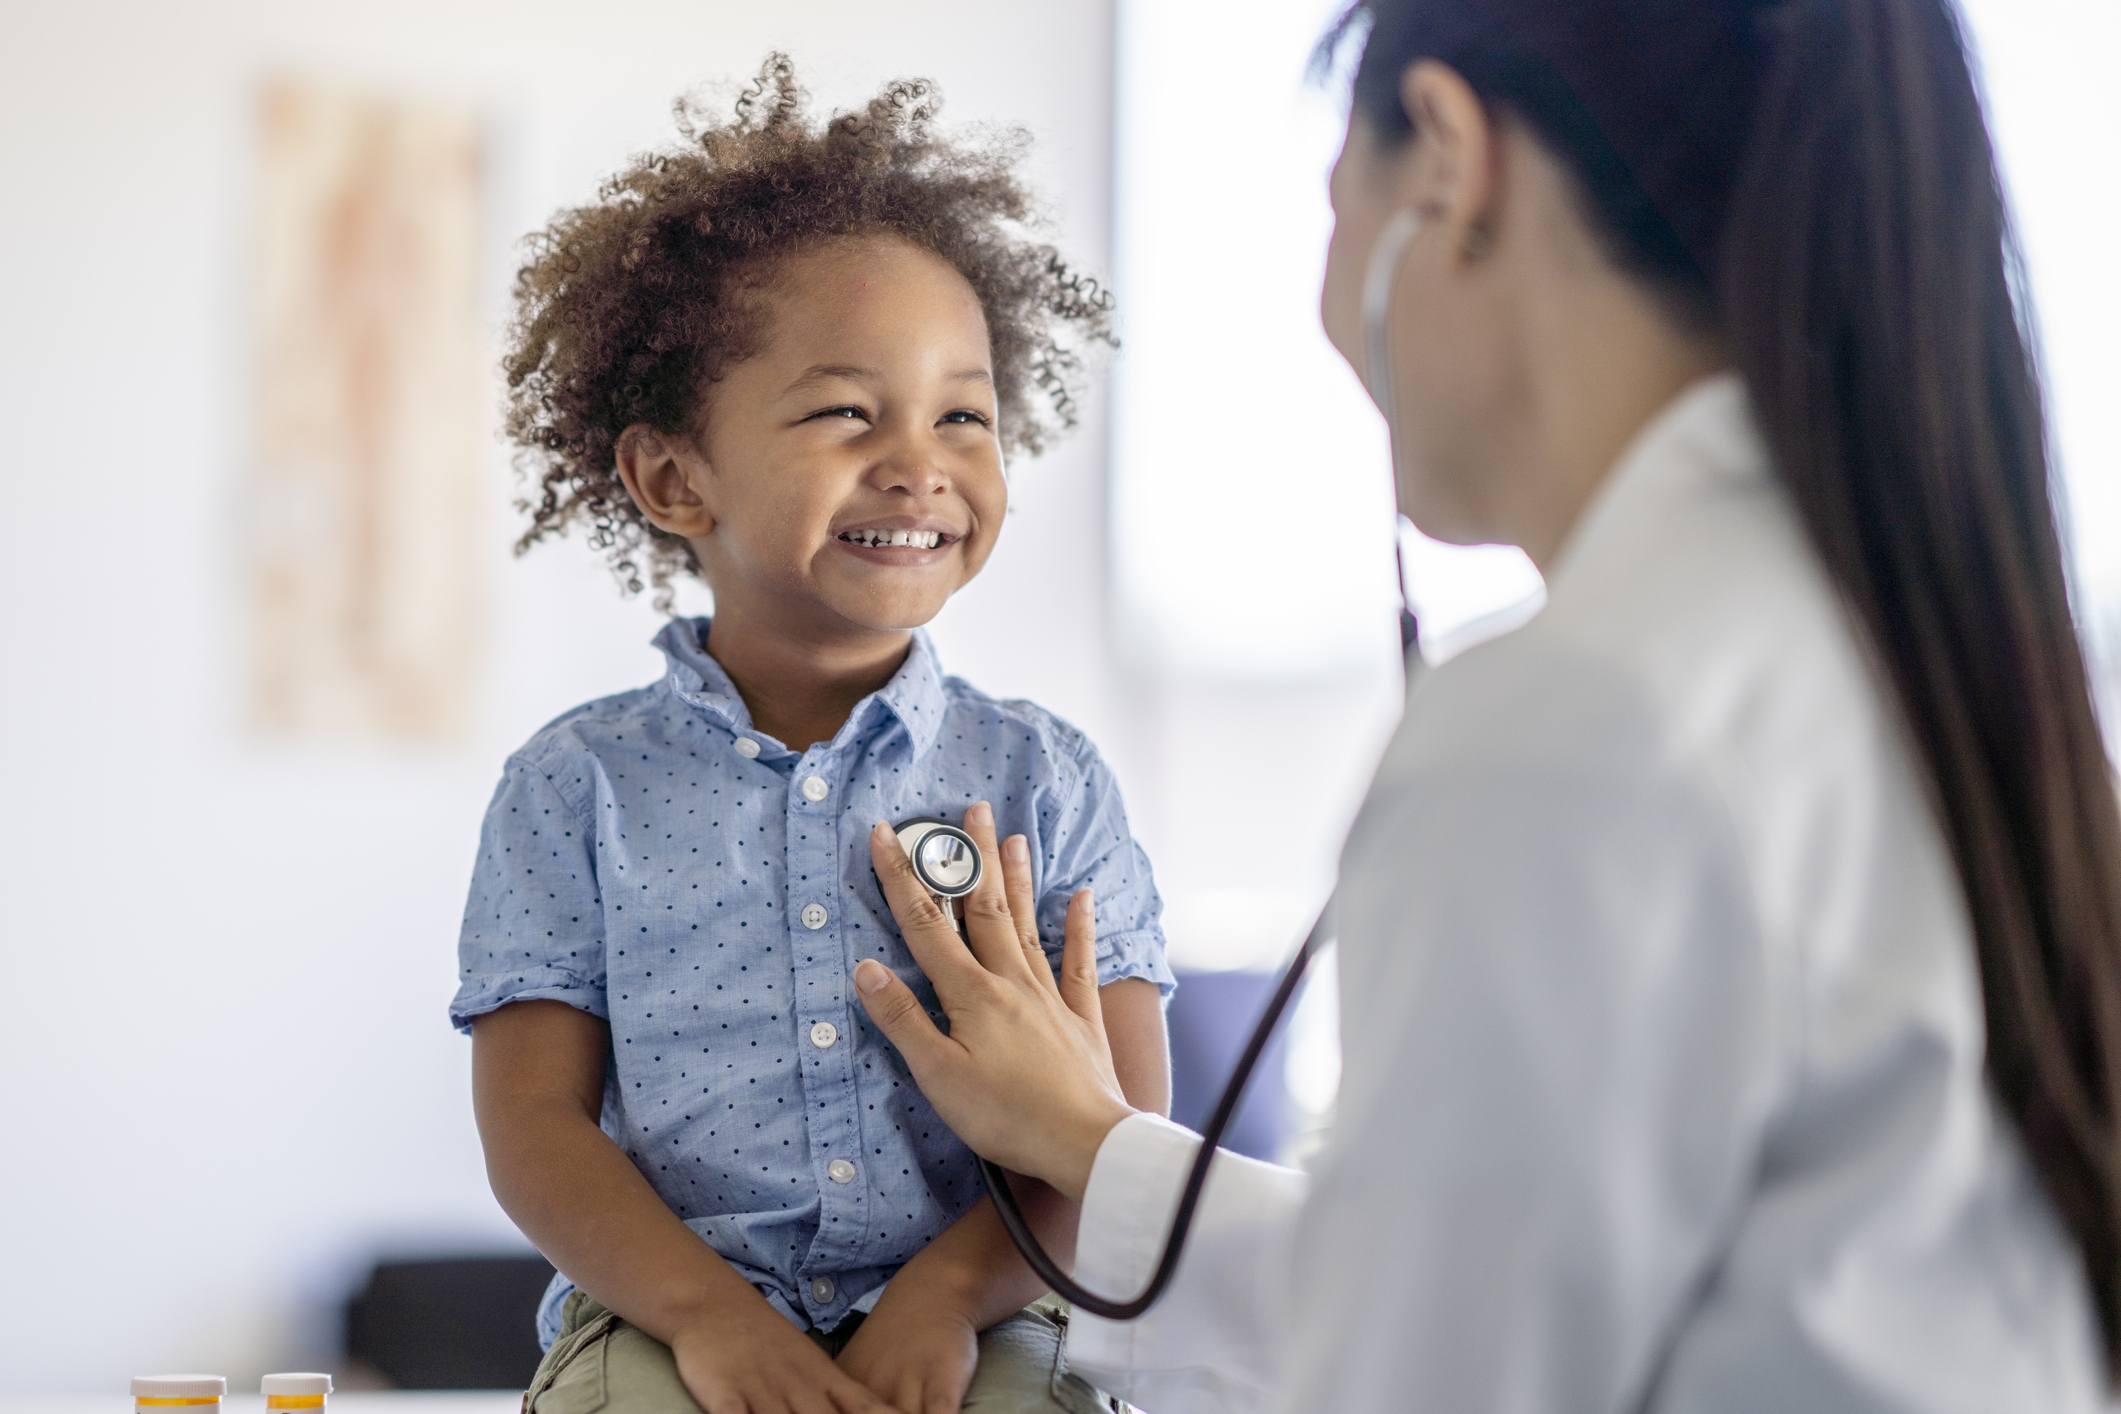 Child smiling with a New York urgent care pediatrician